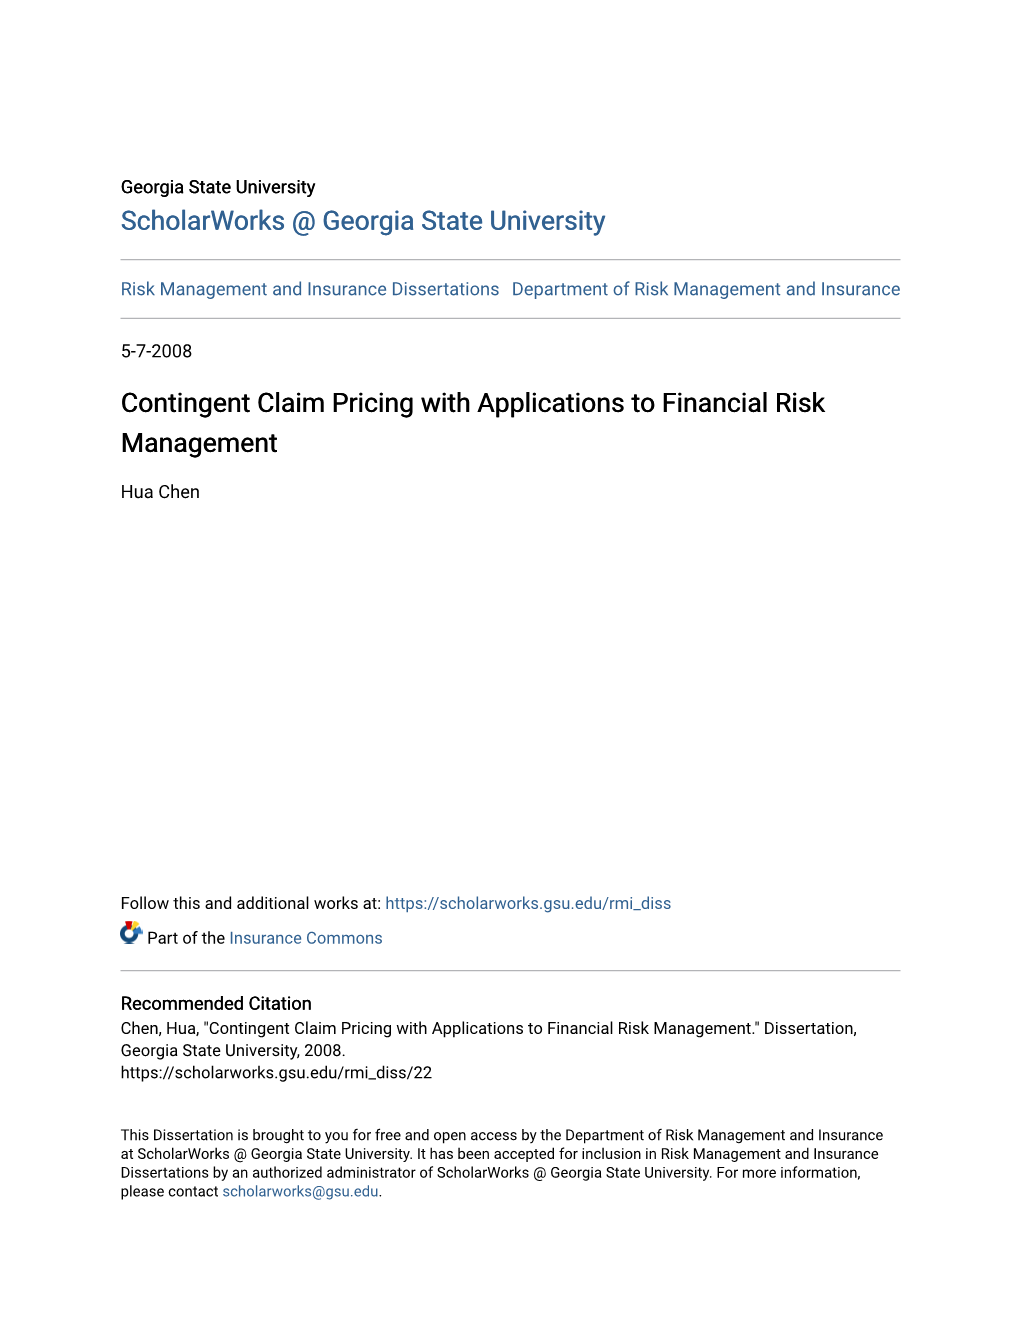 Contingent Claim Pricing with Applications to Financial Risk Management